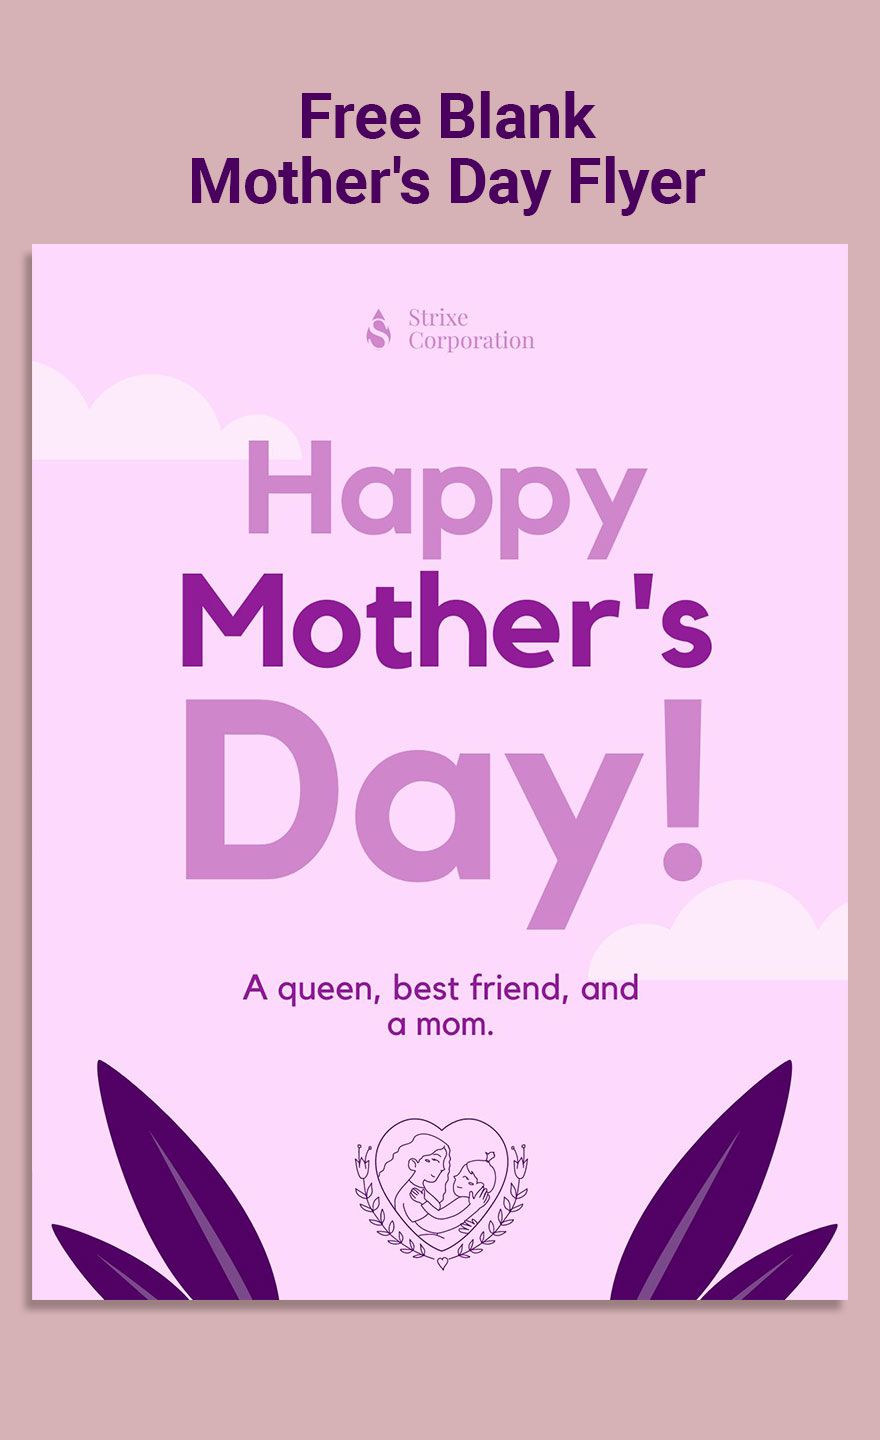 Blank Mother's Day Flyer